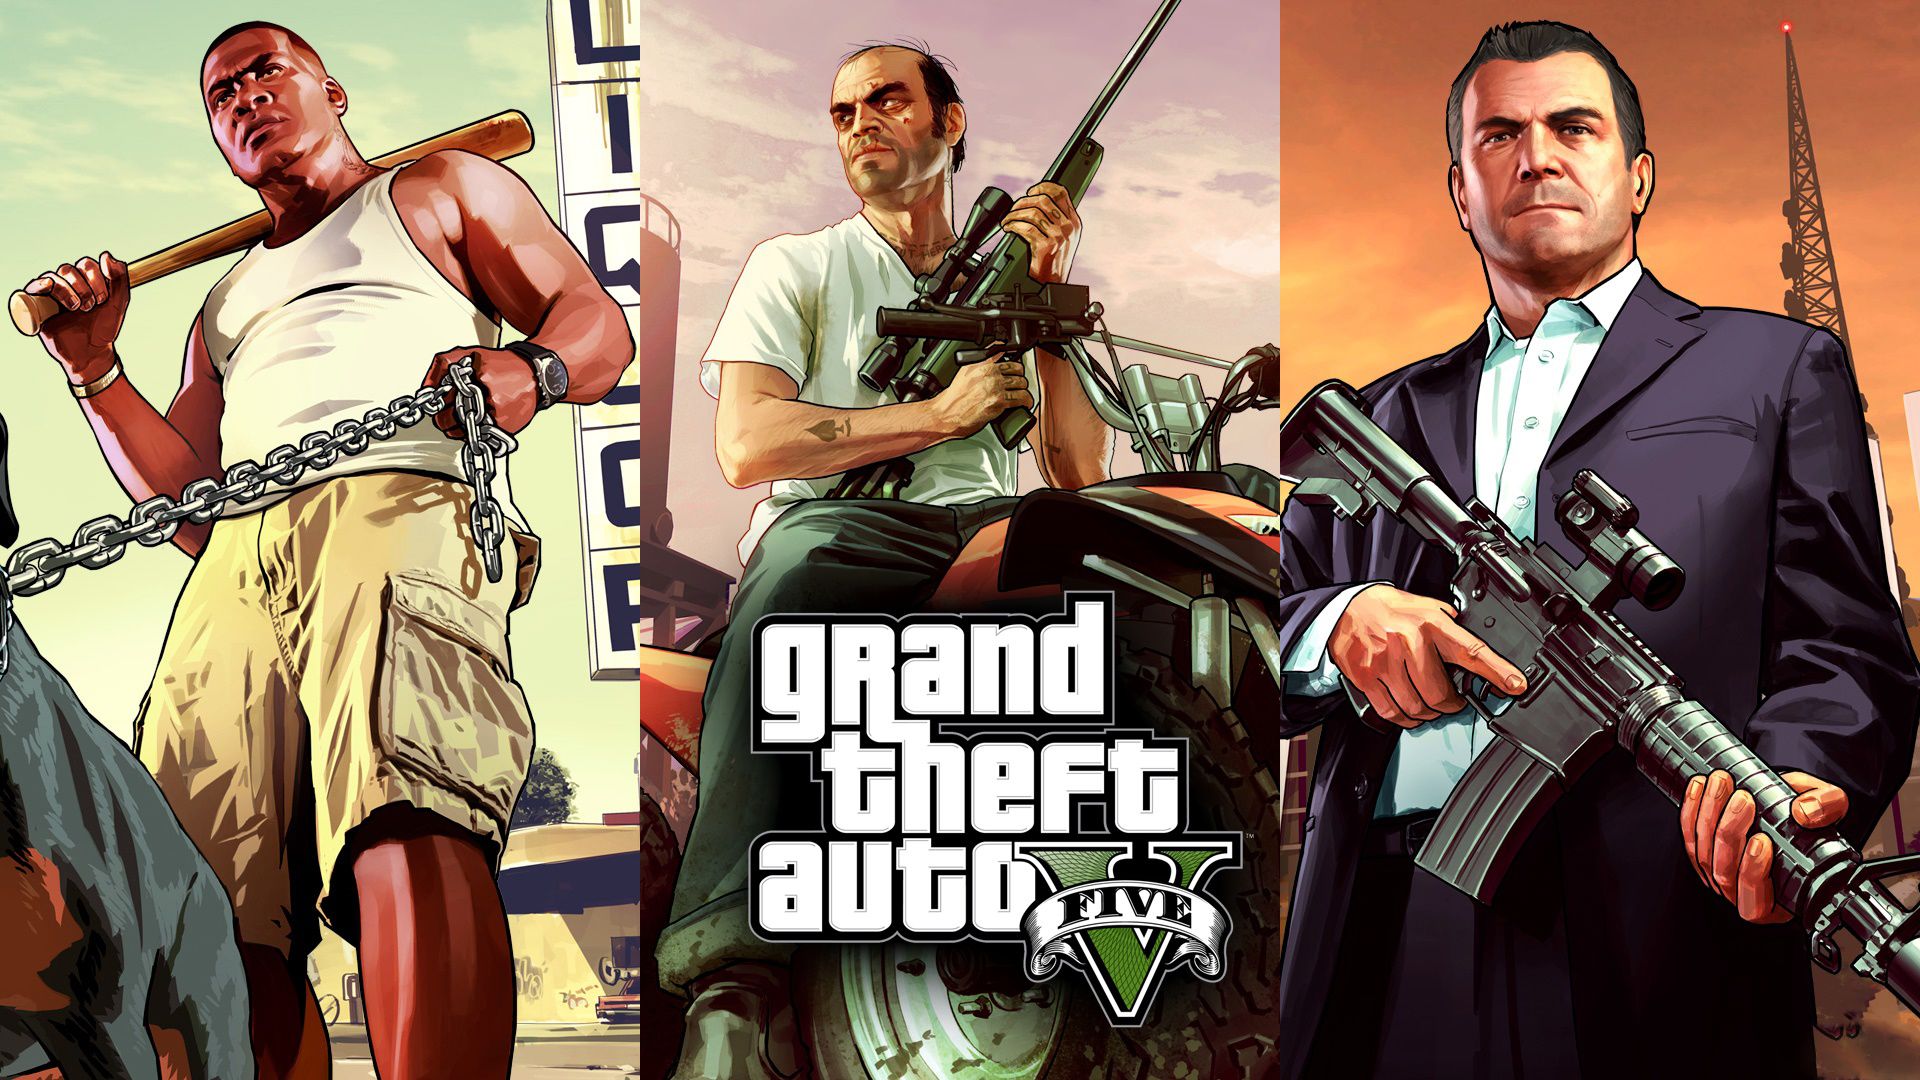 Grand Theft Auto V Characters Wallpaper .tanukinosippo.com